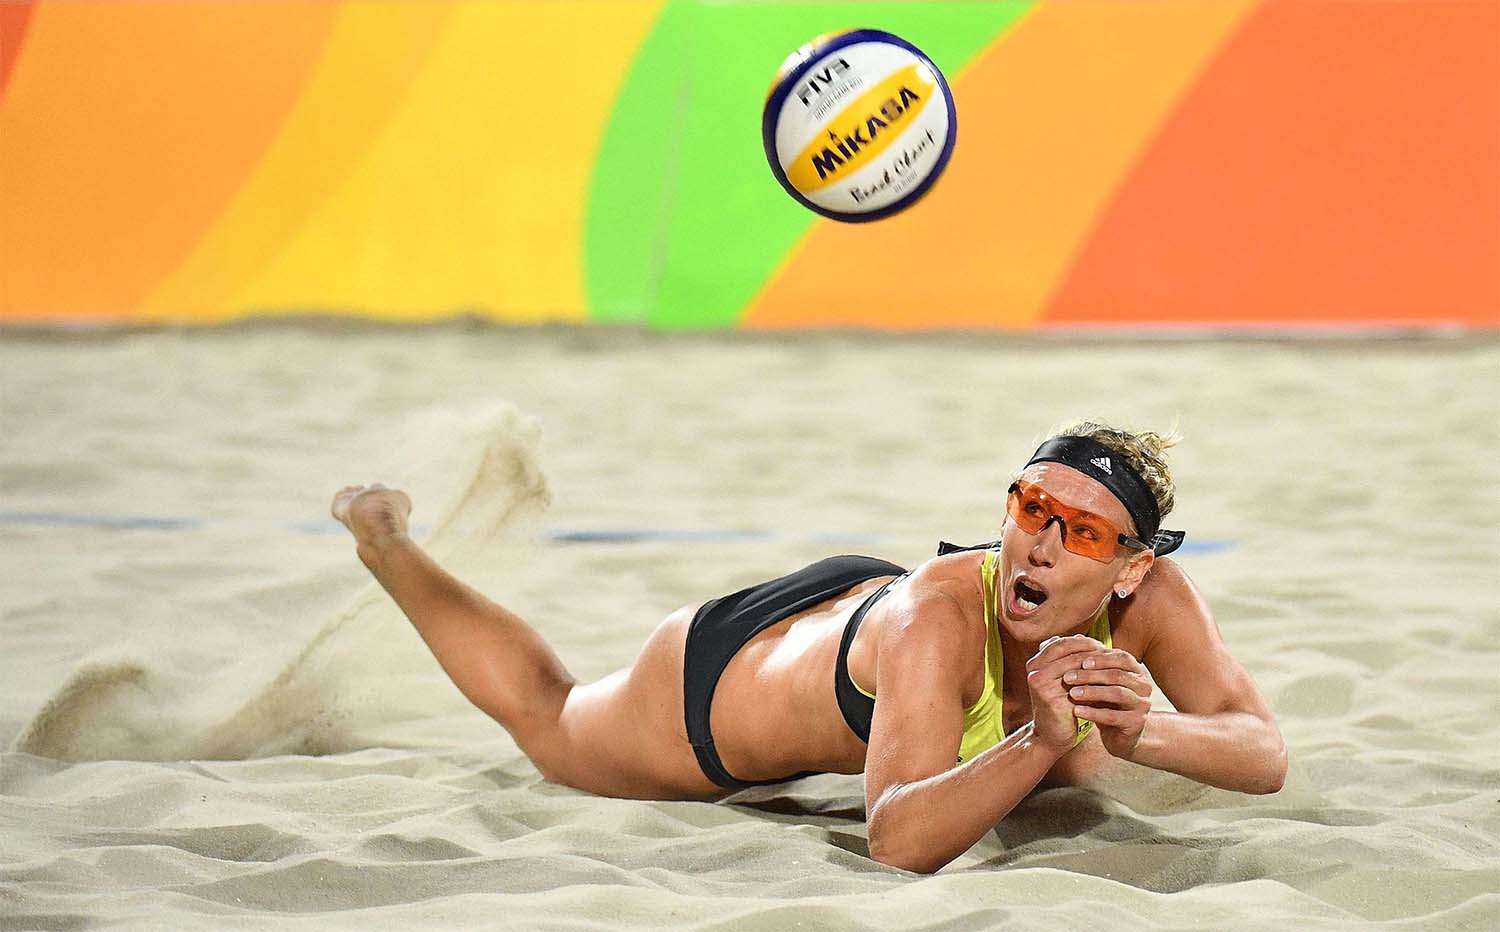 Beach volleyball players cleared to wear bikinis in Qatar event